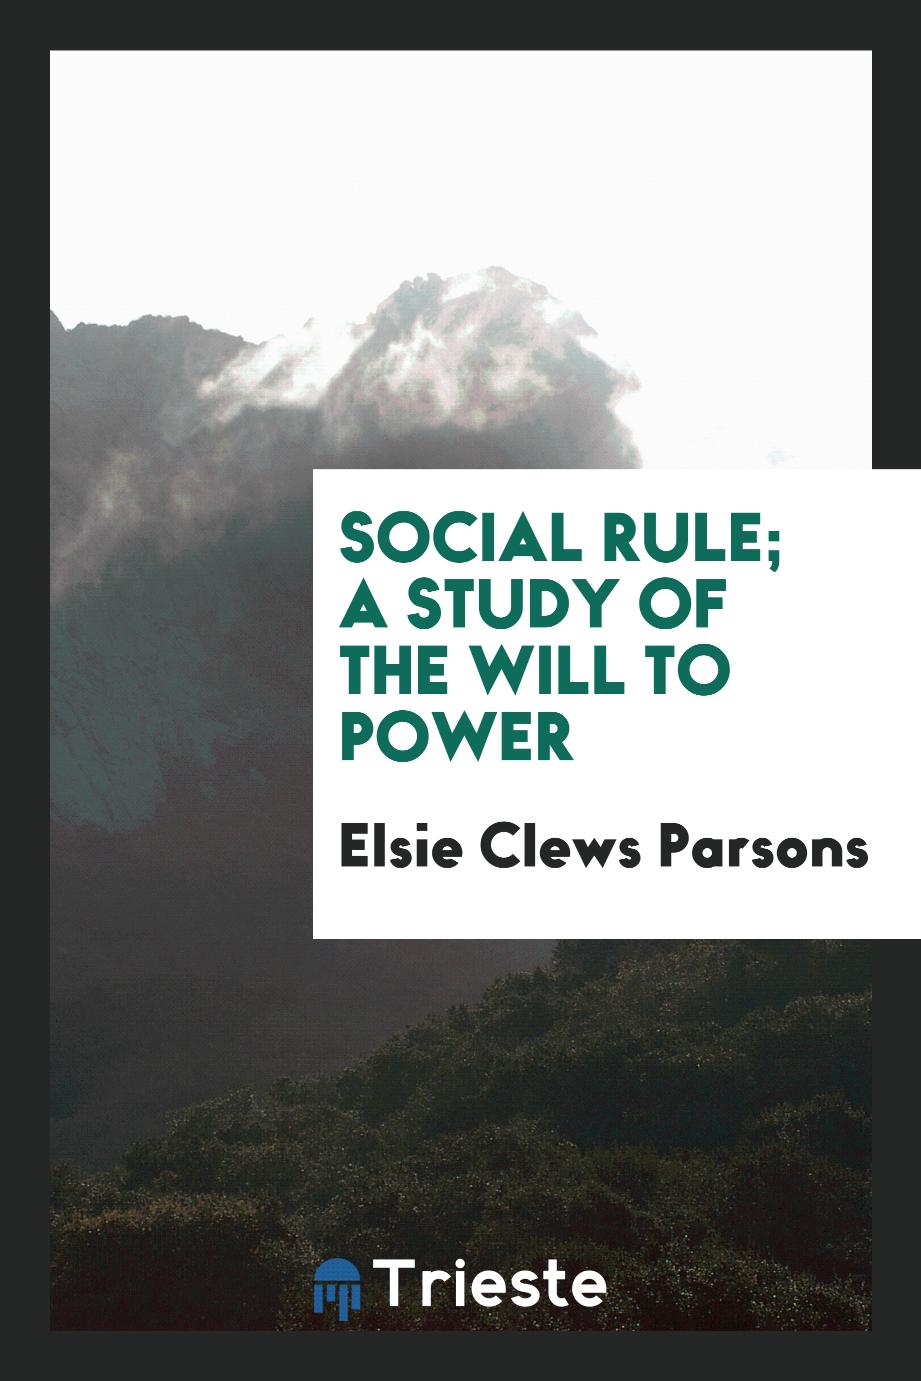 Social rule; a study of the will to power